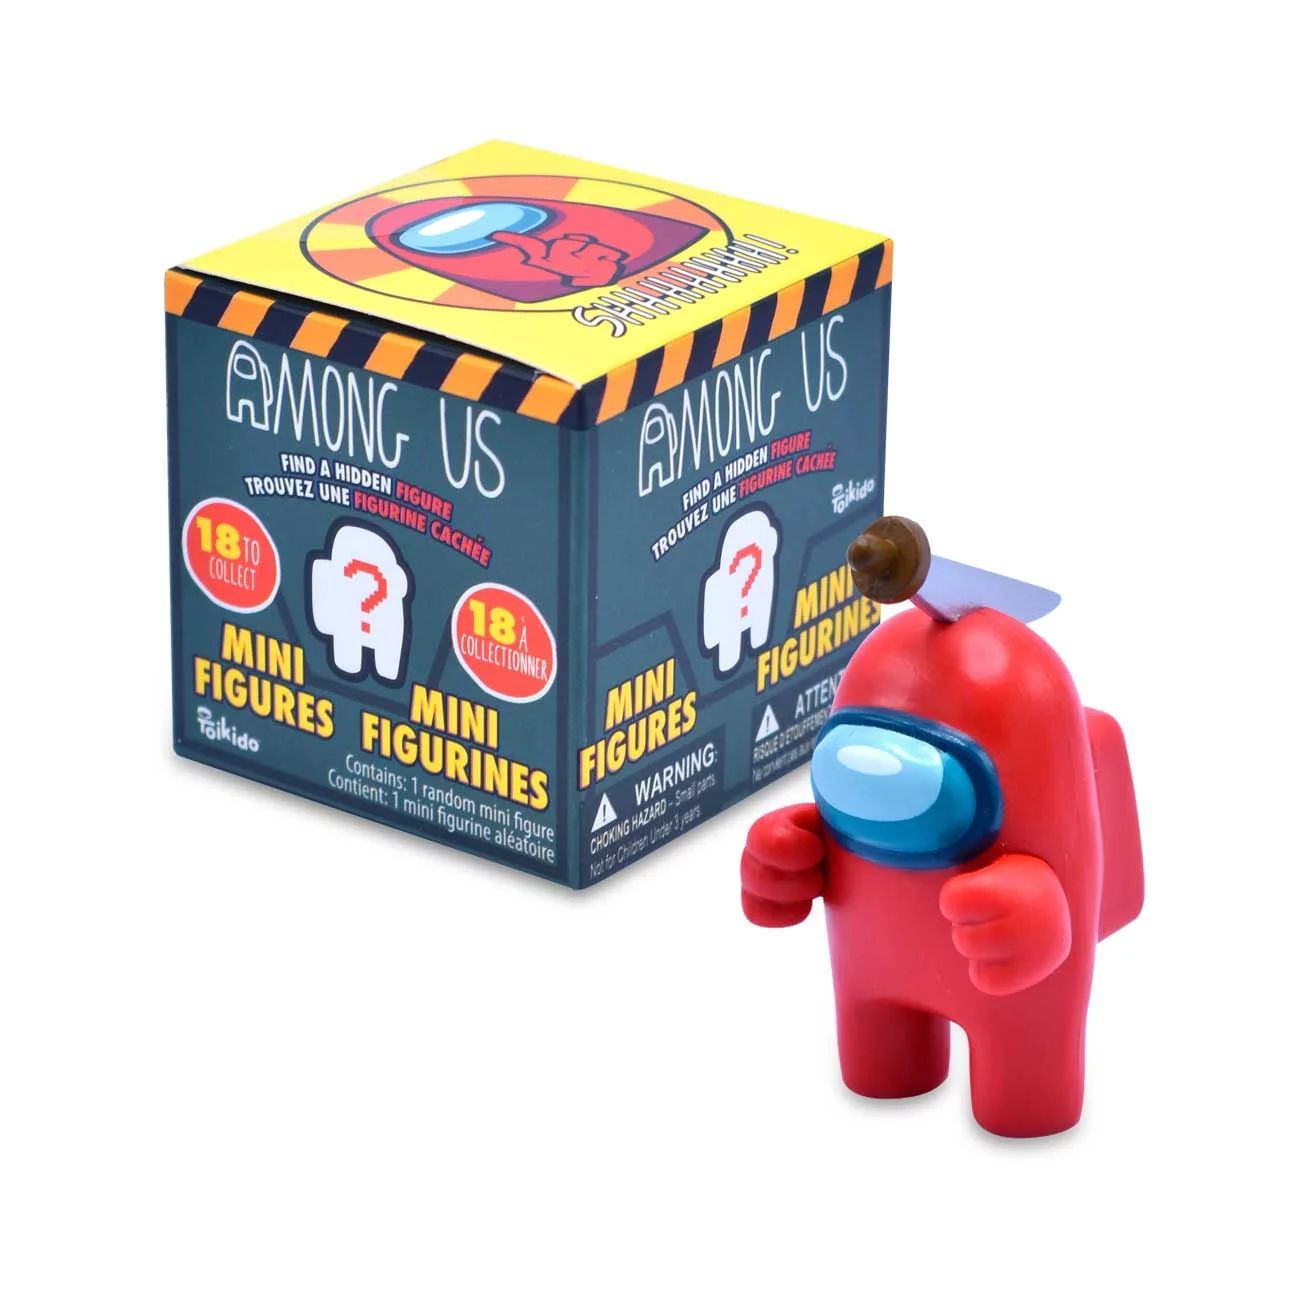 Just Toys Among Us 2 Inch Tall Mini Figures, Blind Box Assorted, Styles May Vary | Walmart (US)